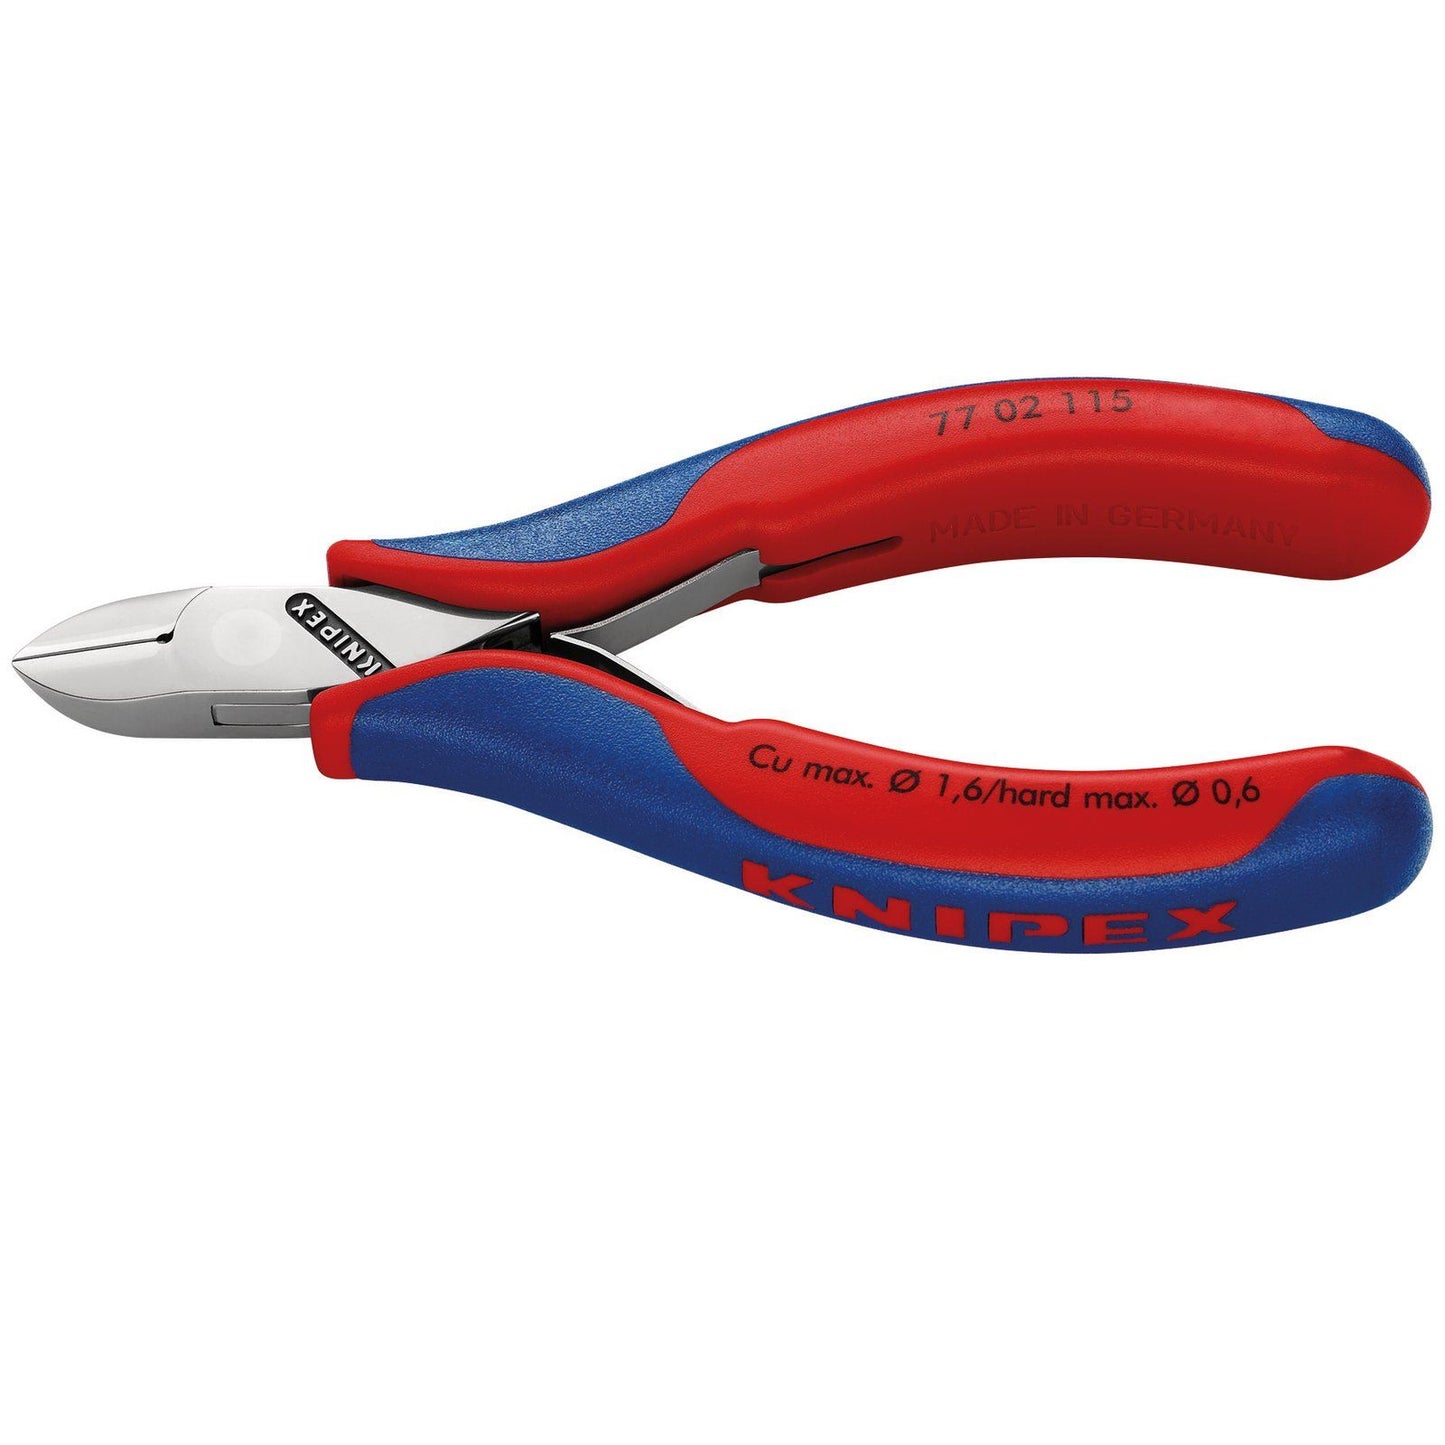 Knipex Knipex 77 02 115 115mm Flush Electronics Diagonal Cutters - 27721